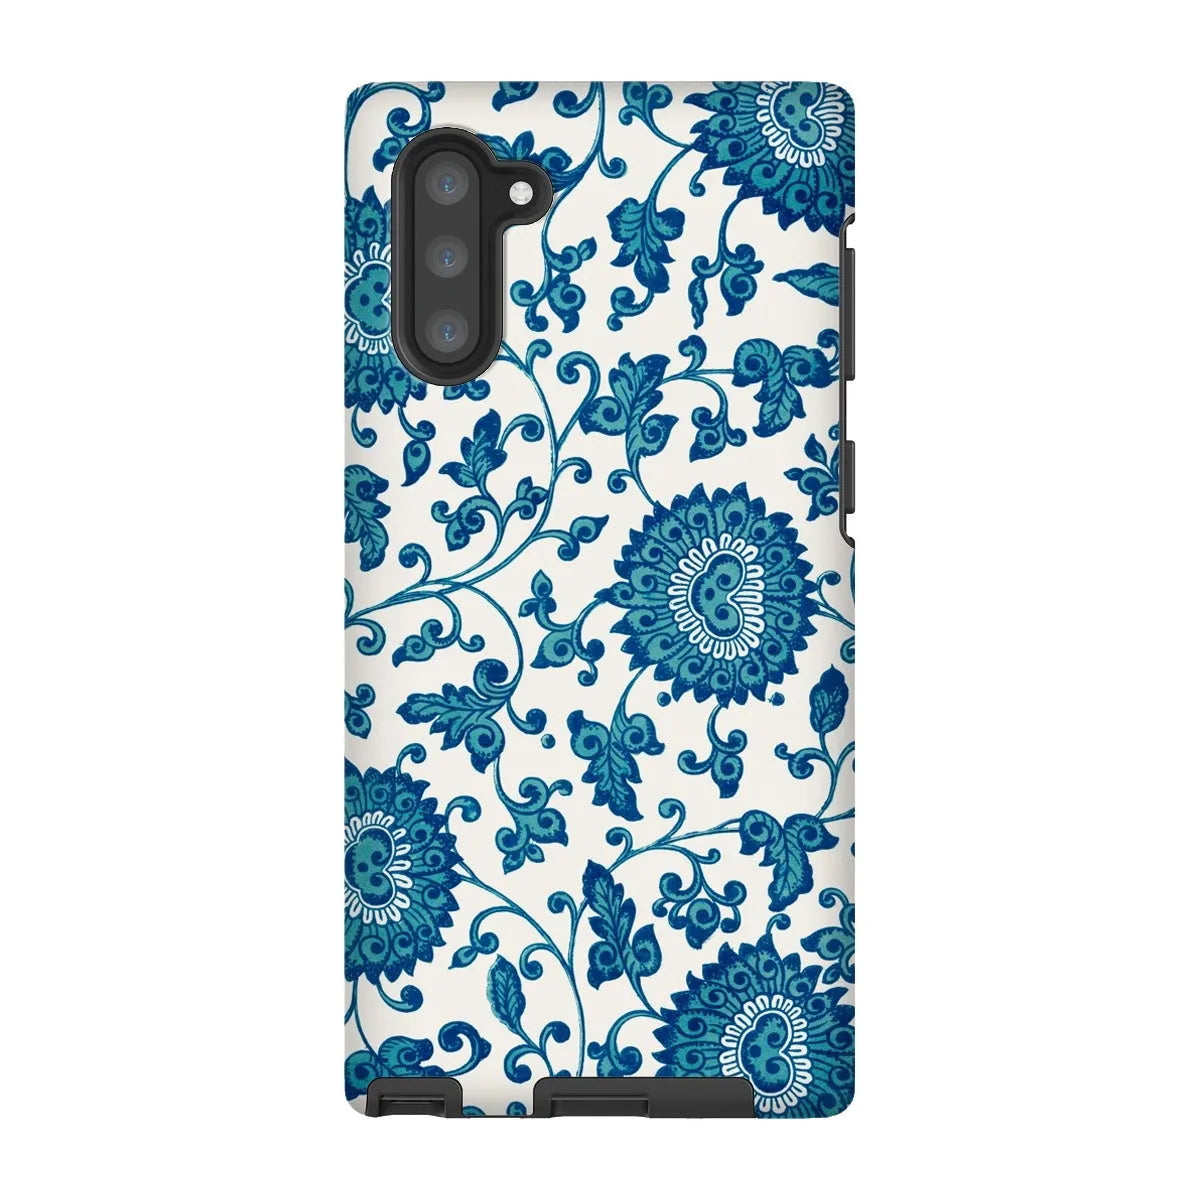 Blue And White Floral Aesthetic Art Phone Case - Owen Jones - Samsung Galaxy Note 10 / Matte - Mobile Phone Cases